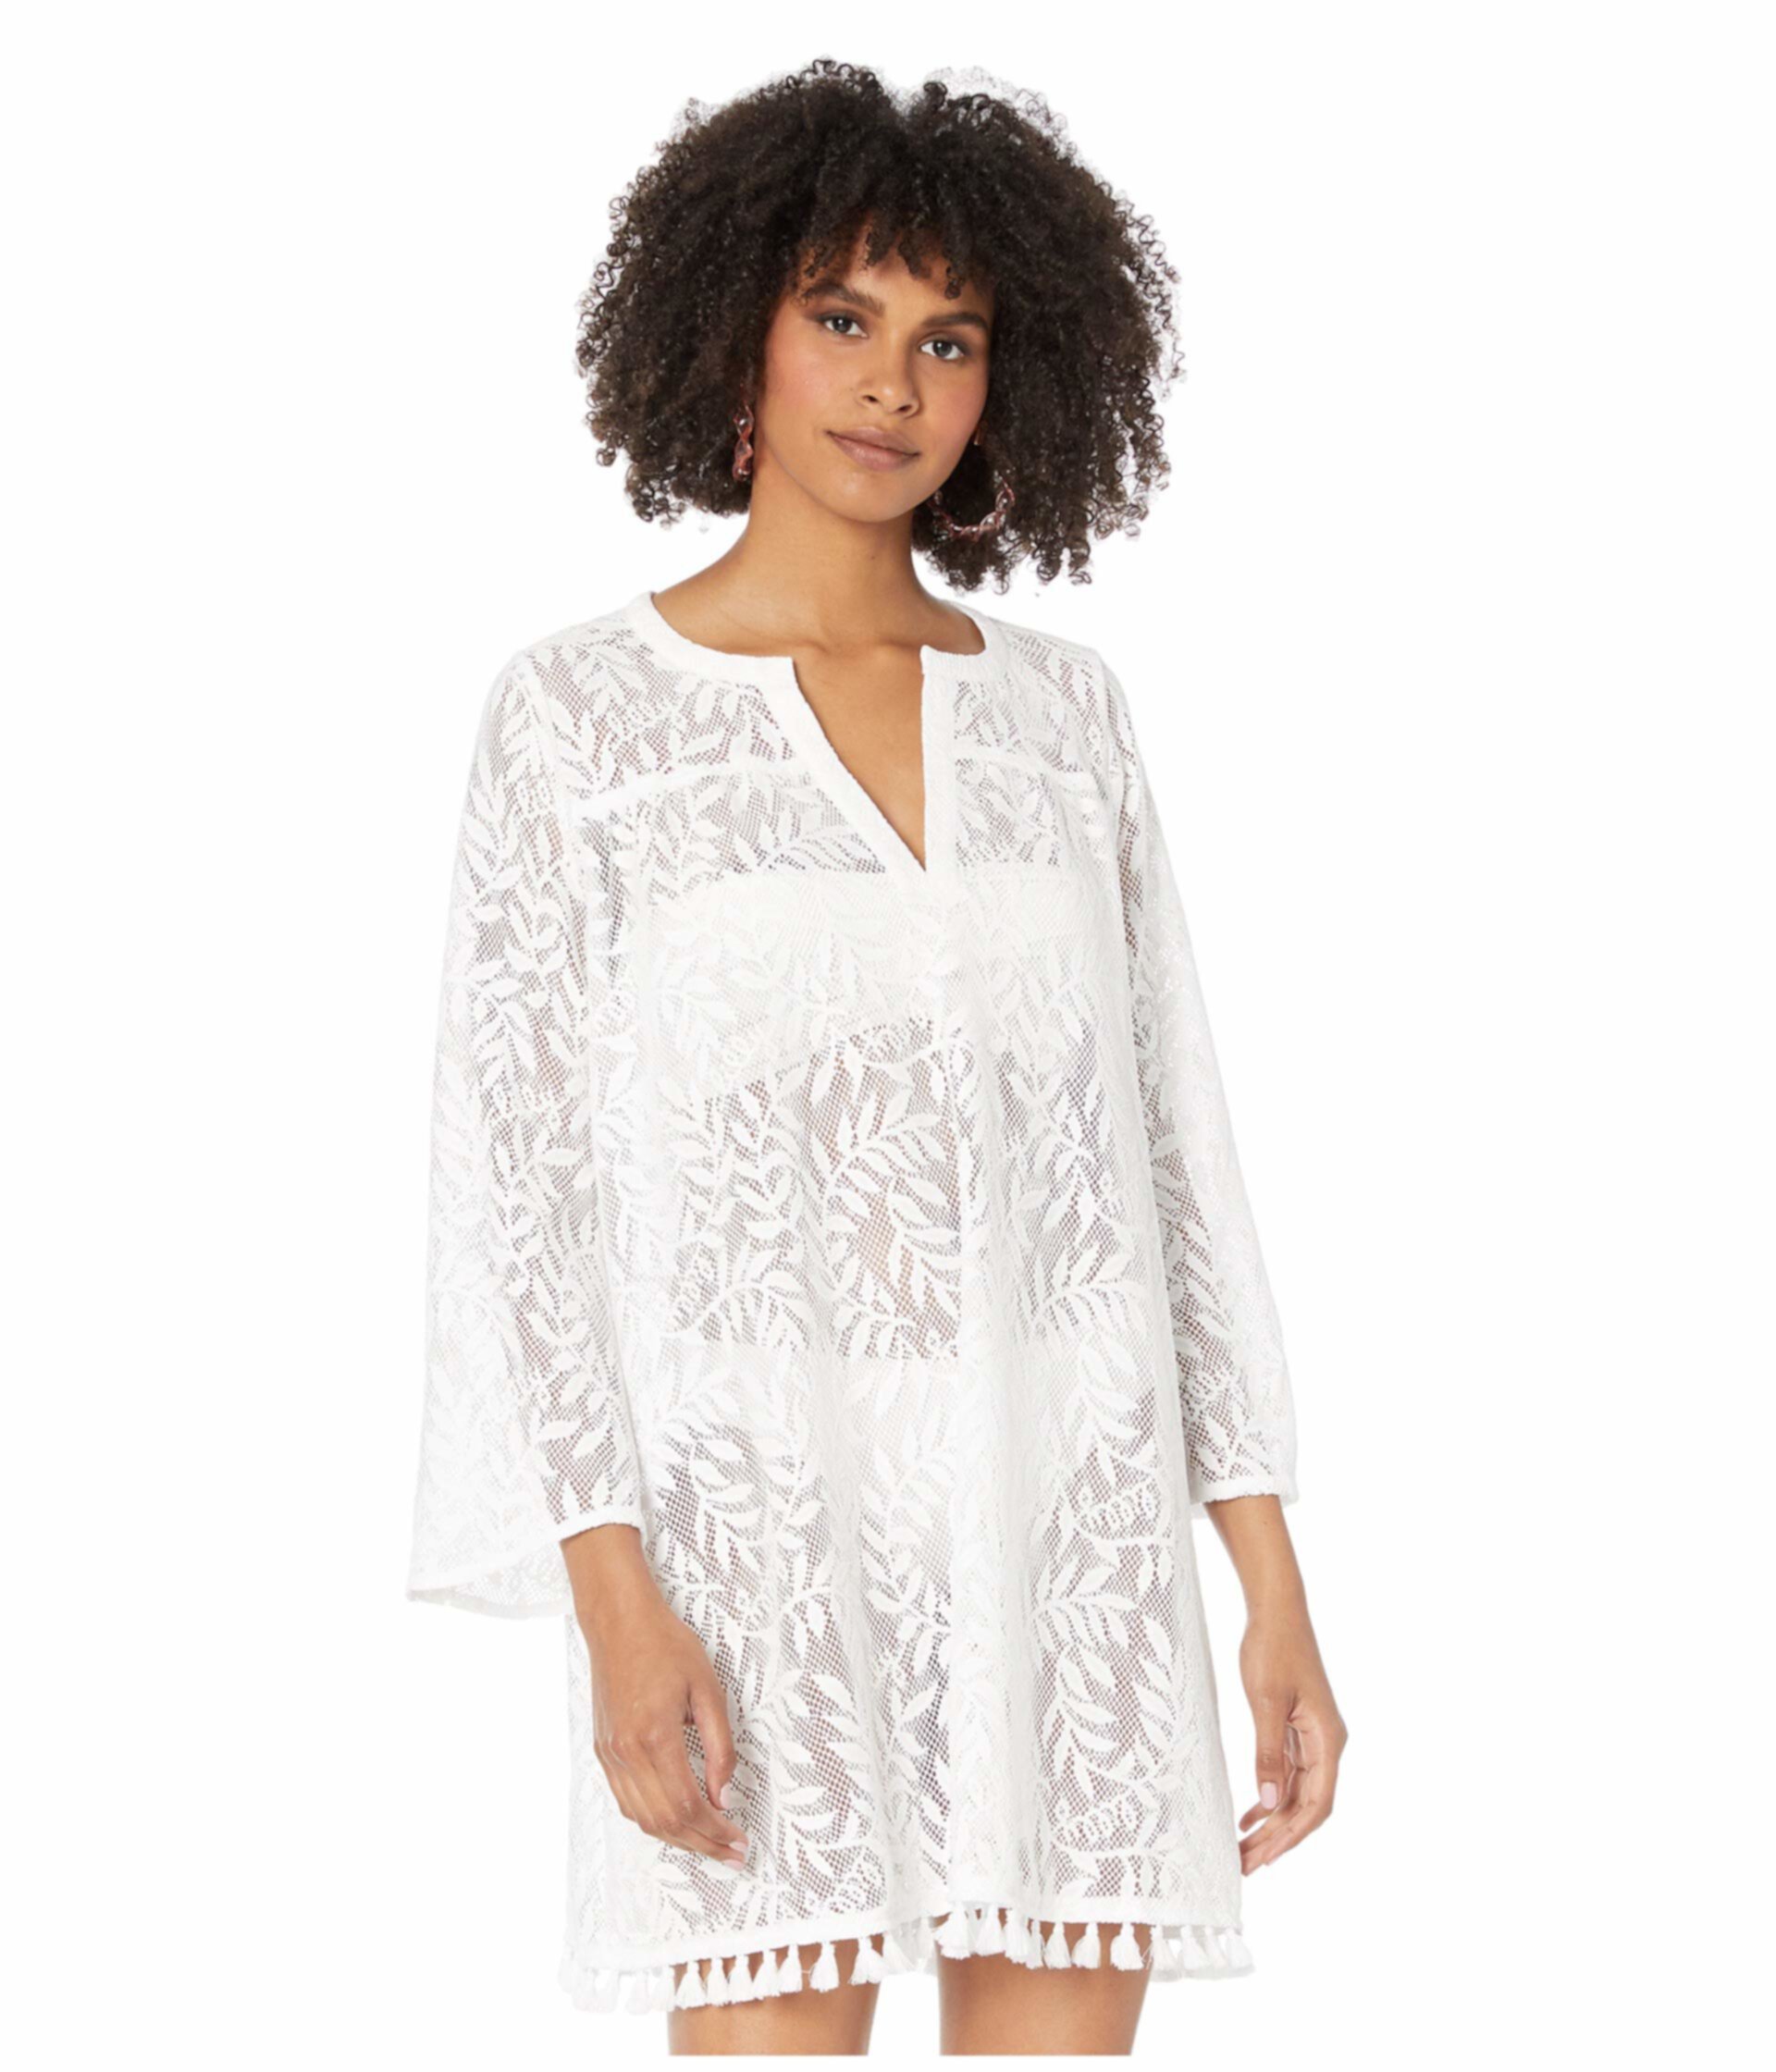 Kizzy Cover-Up Lilly Pulitzer